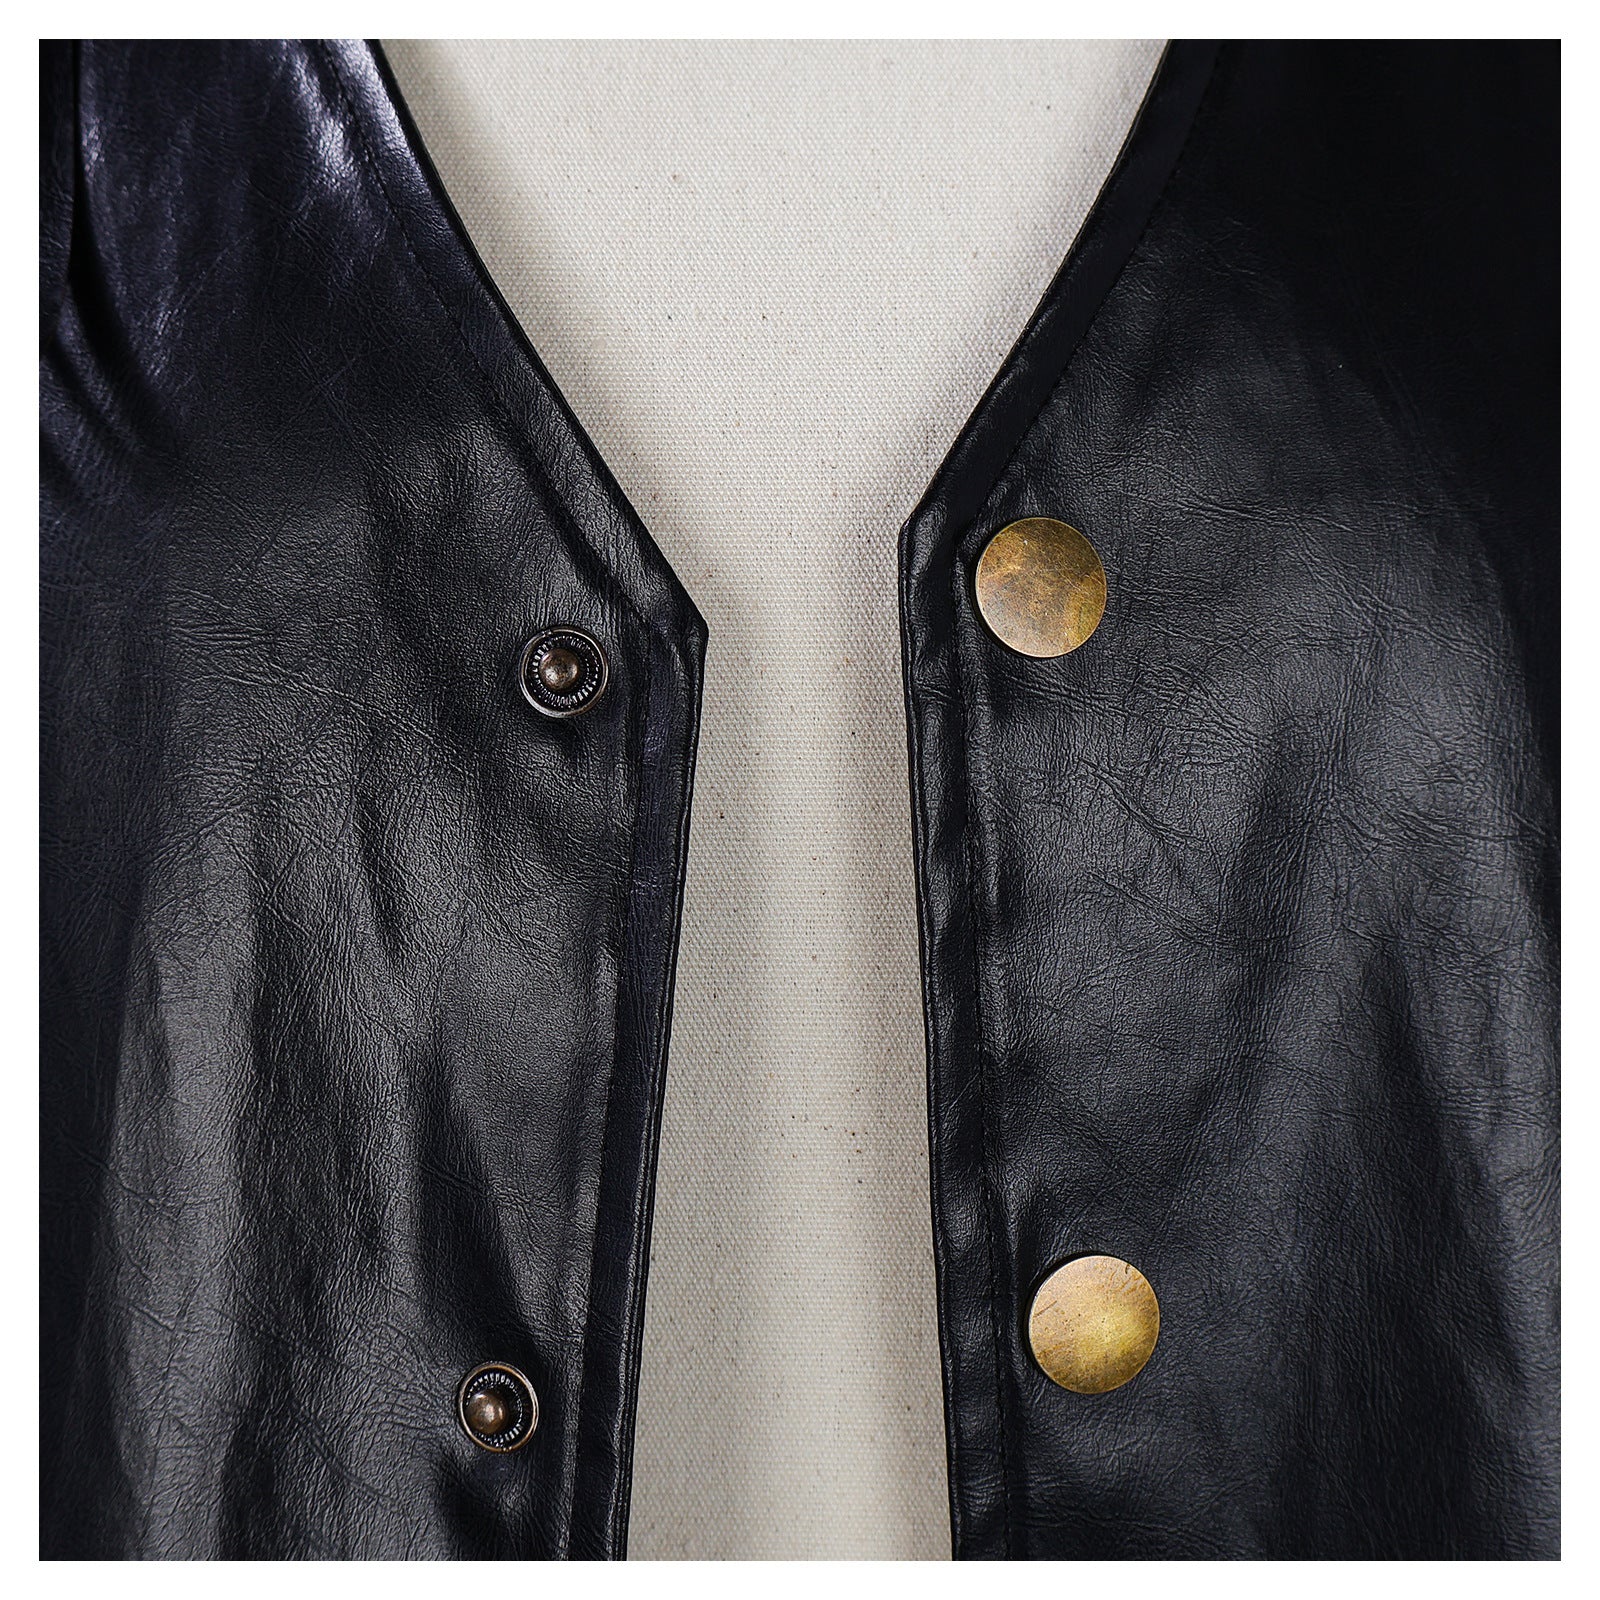 Close-up of a Maramalive™ European Retro Vest For Men with brass-colored snap buttons and white chenille fabric visible underneath, evoking an edgy Harajuku style.